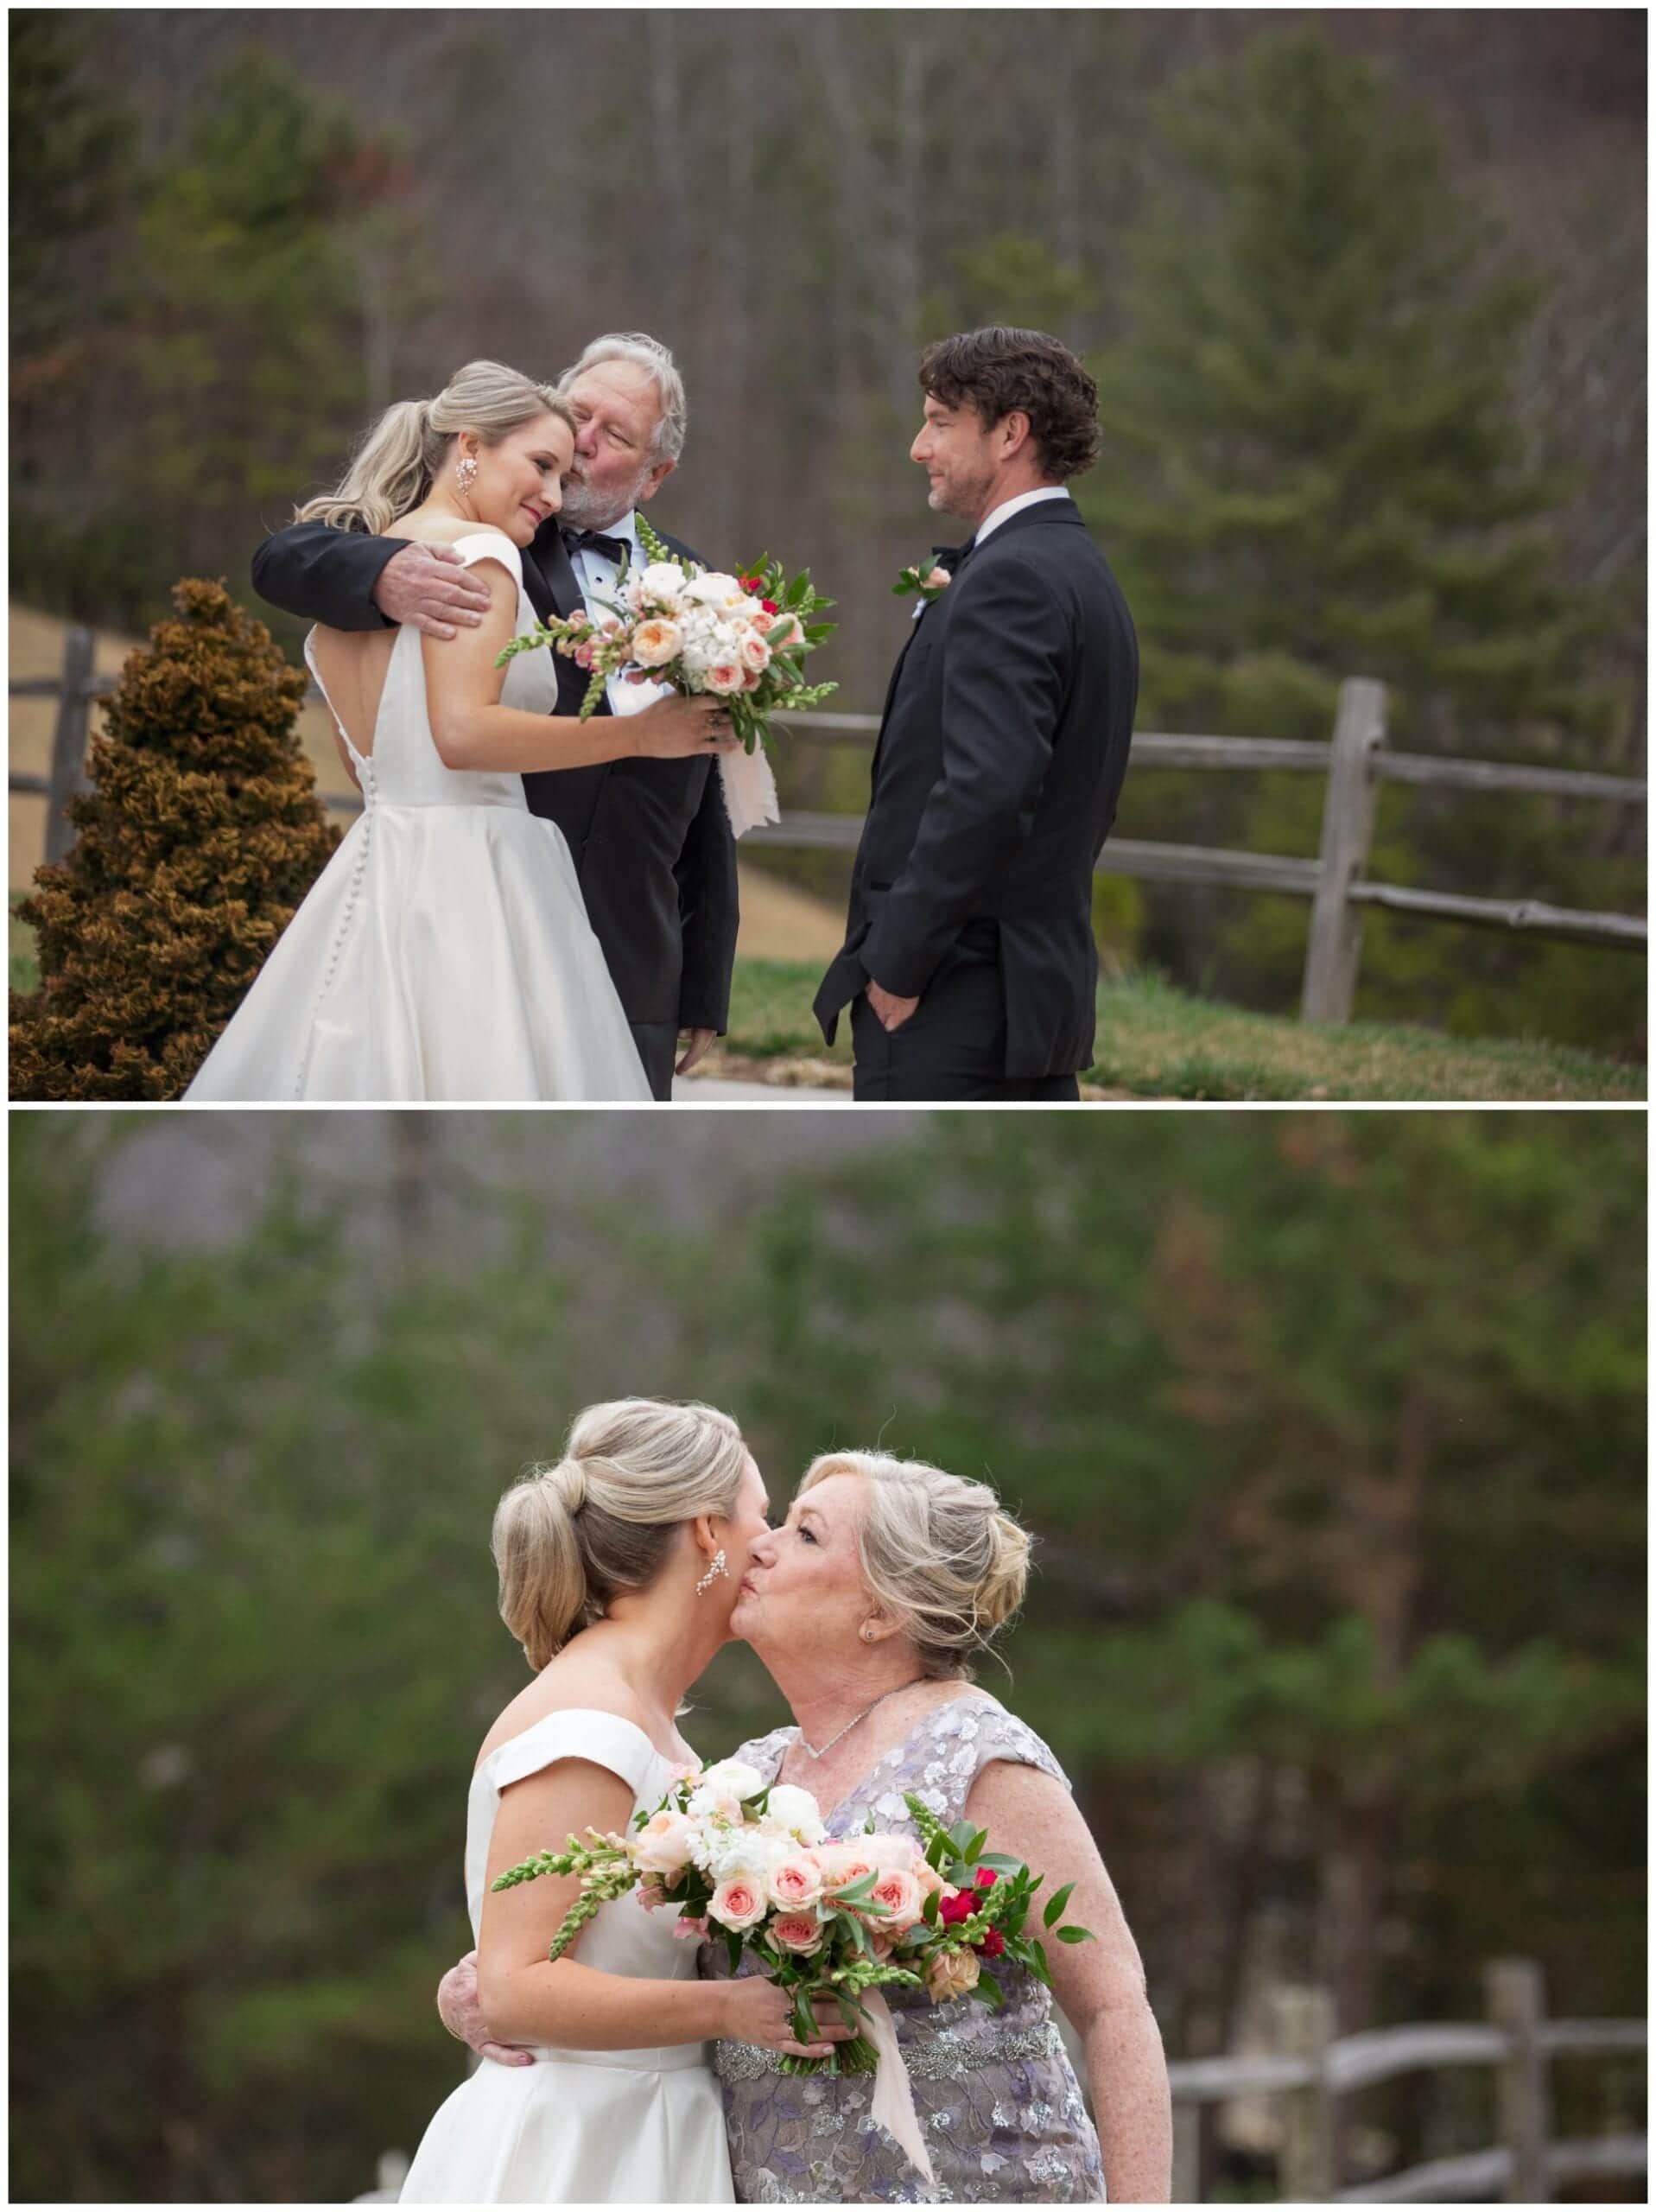 Mom and Dad give daughter a kiss